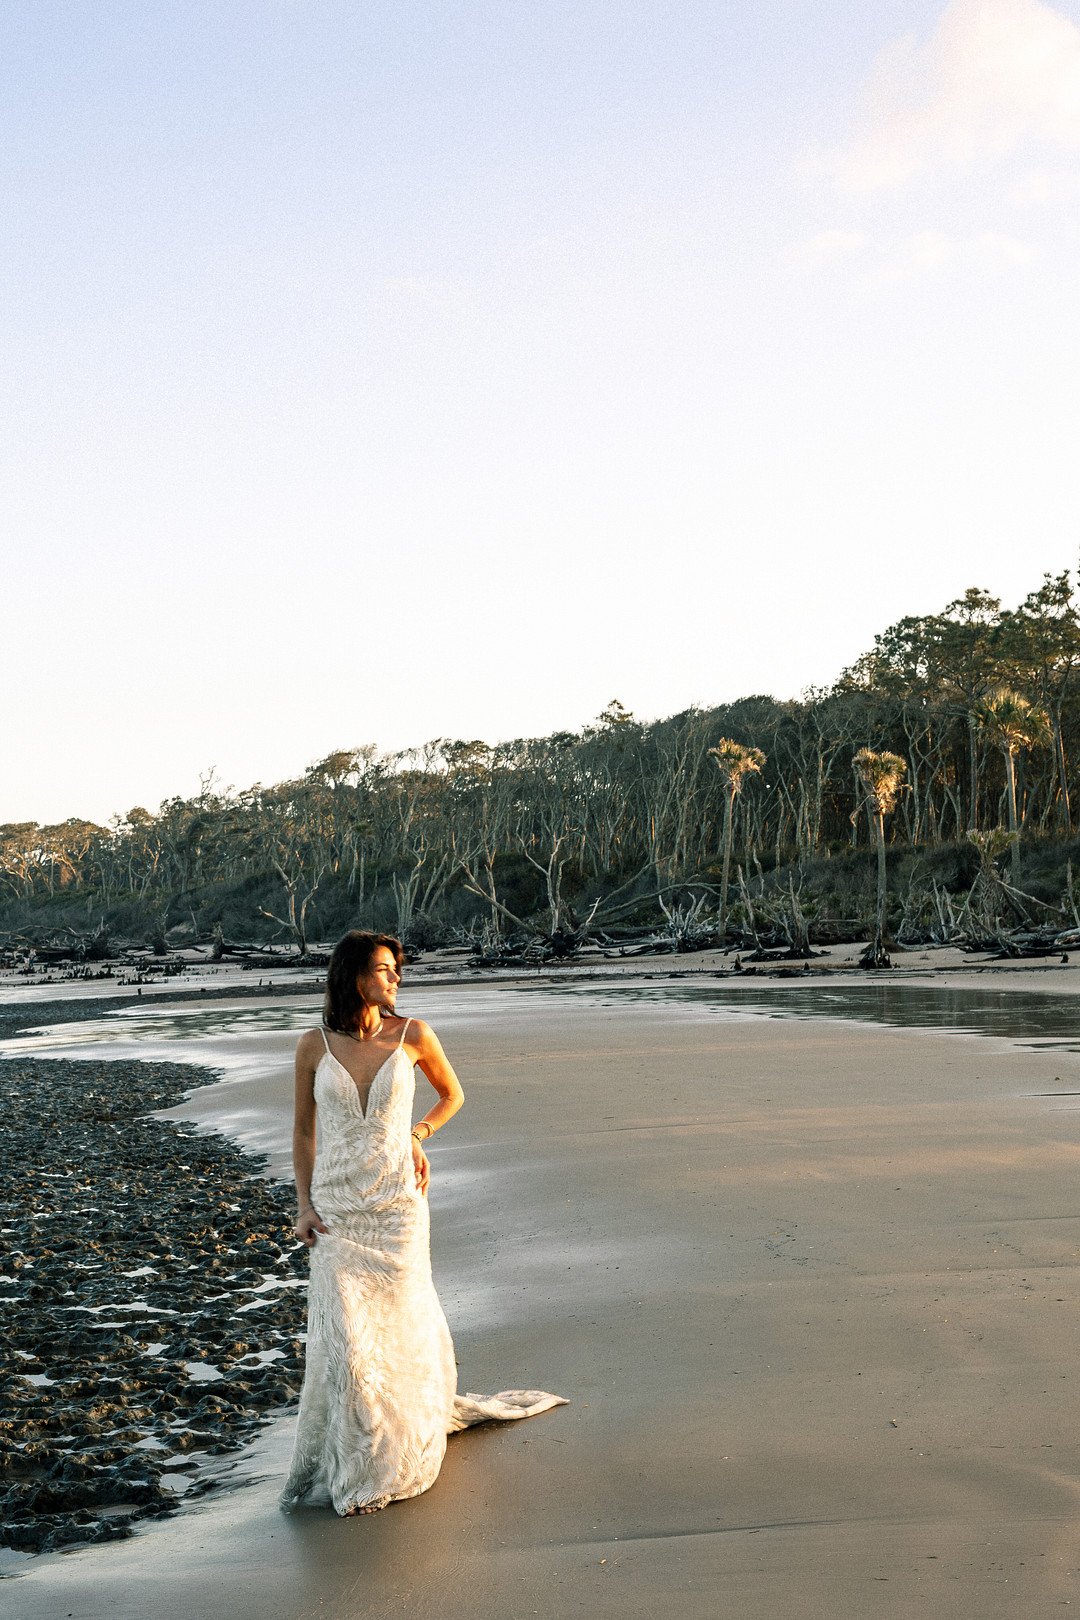 A beachy bridal moment_Carly Terry Photography_AW BRIDAL-0643_low.jpg